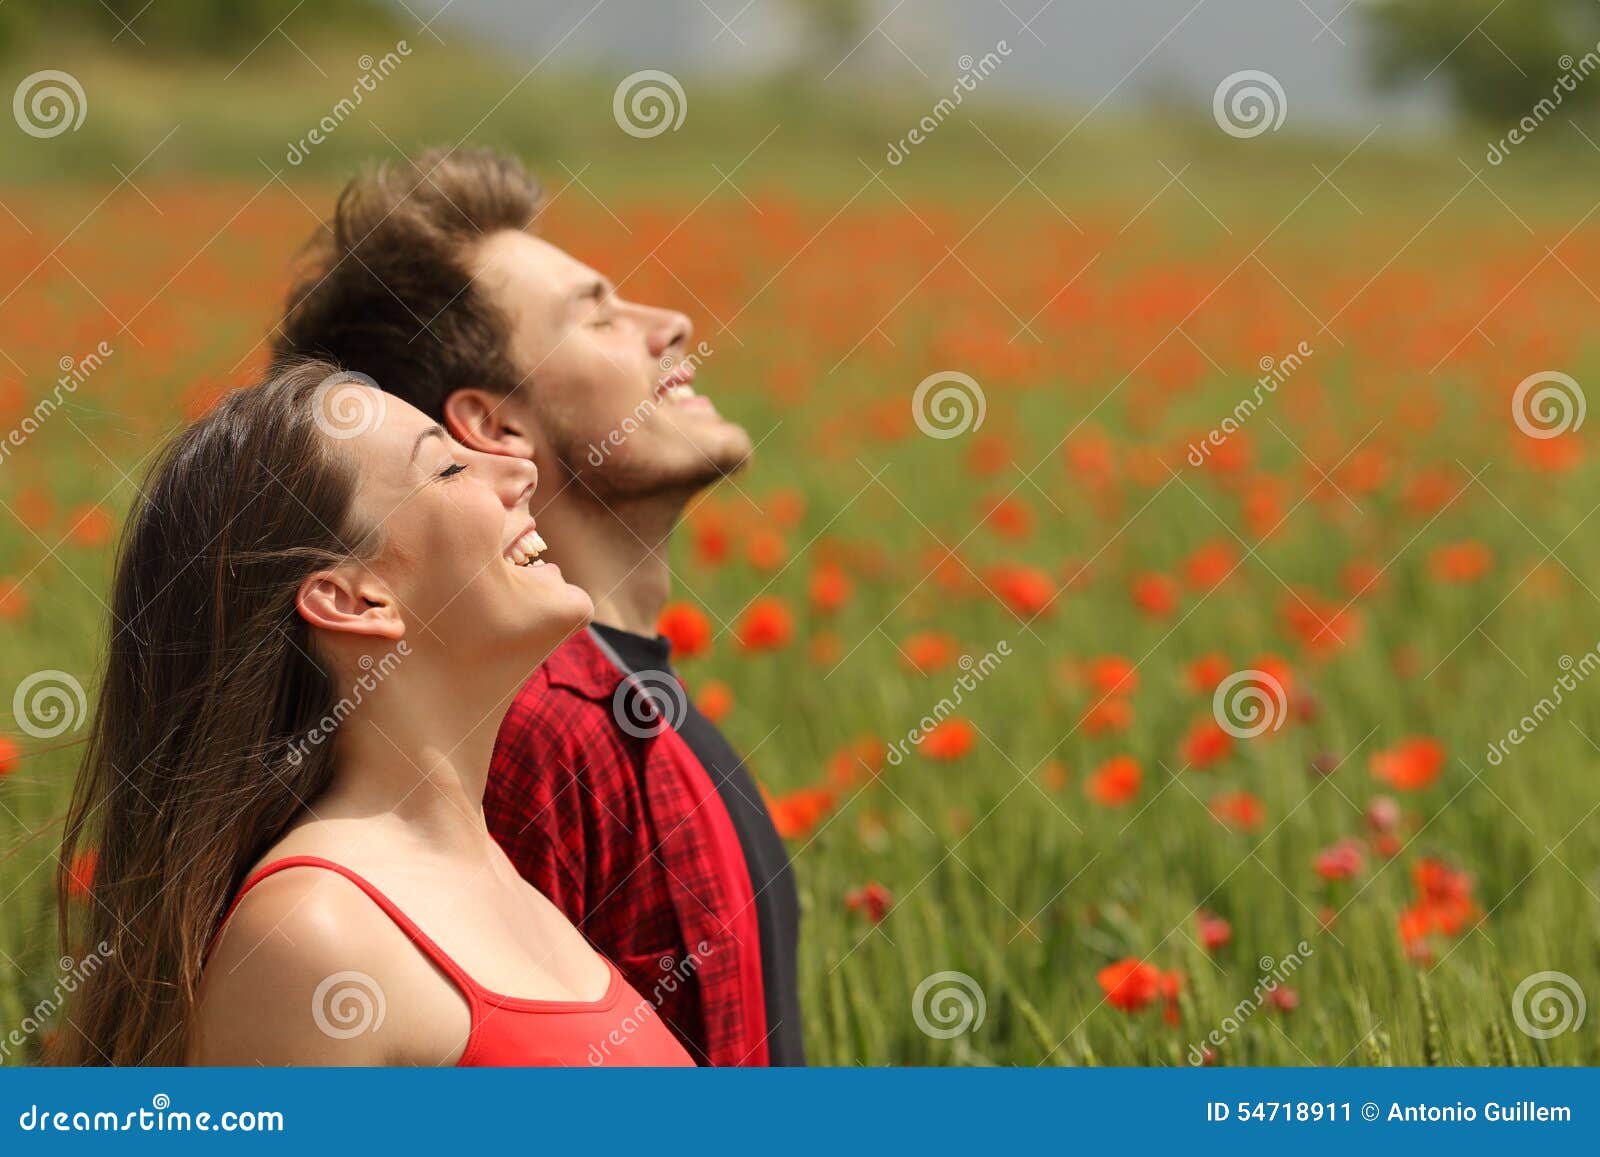 happy couple breathing fresh air in a red field